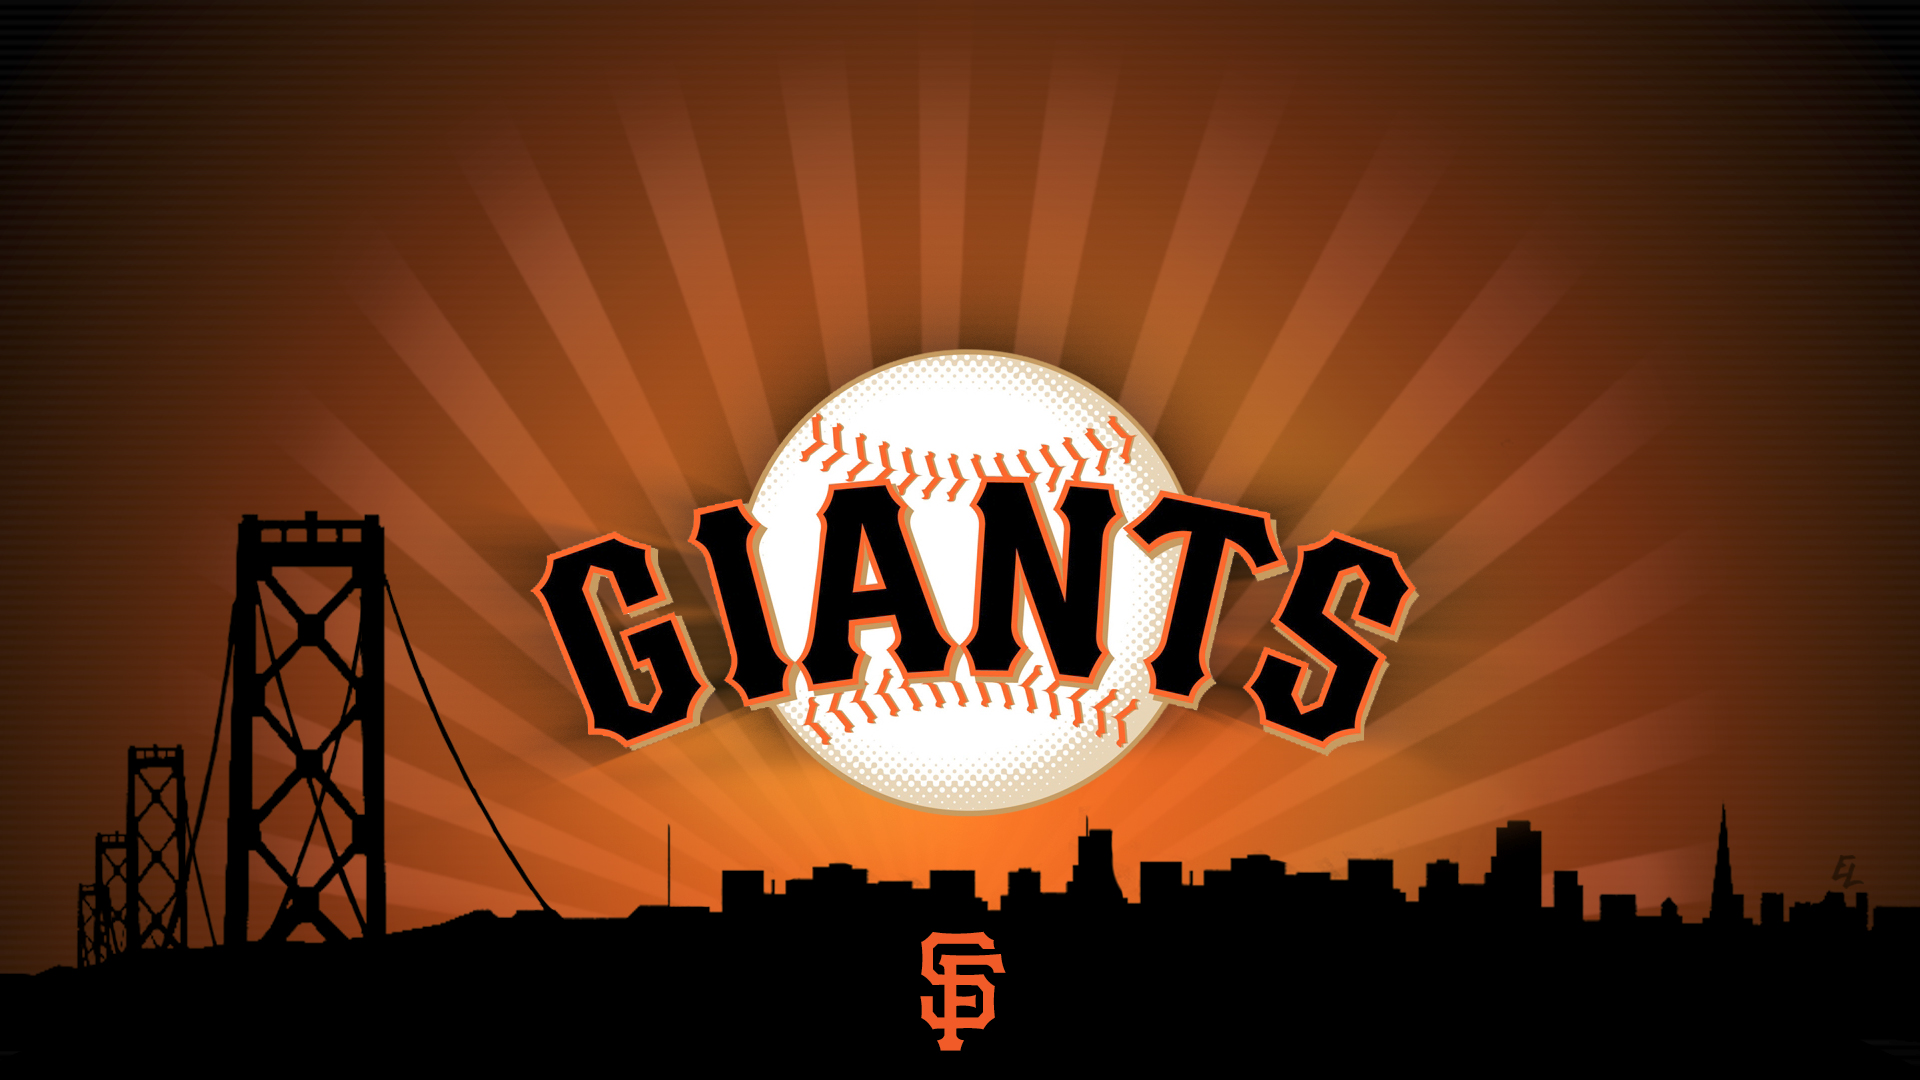 The San Francisco Giants face of against their long time rivals the